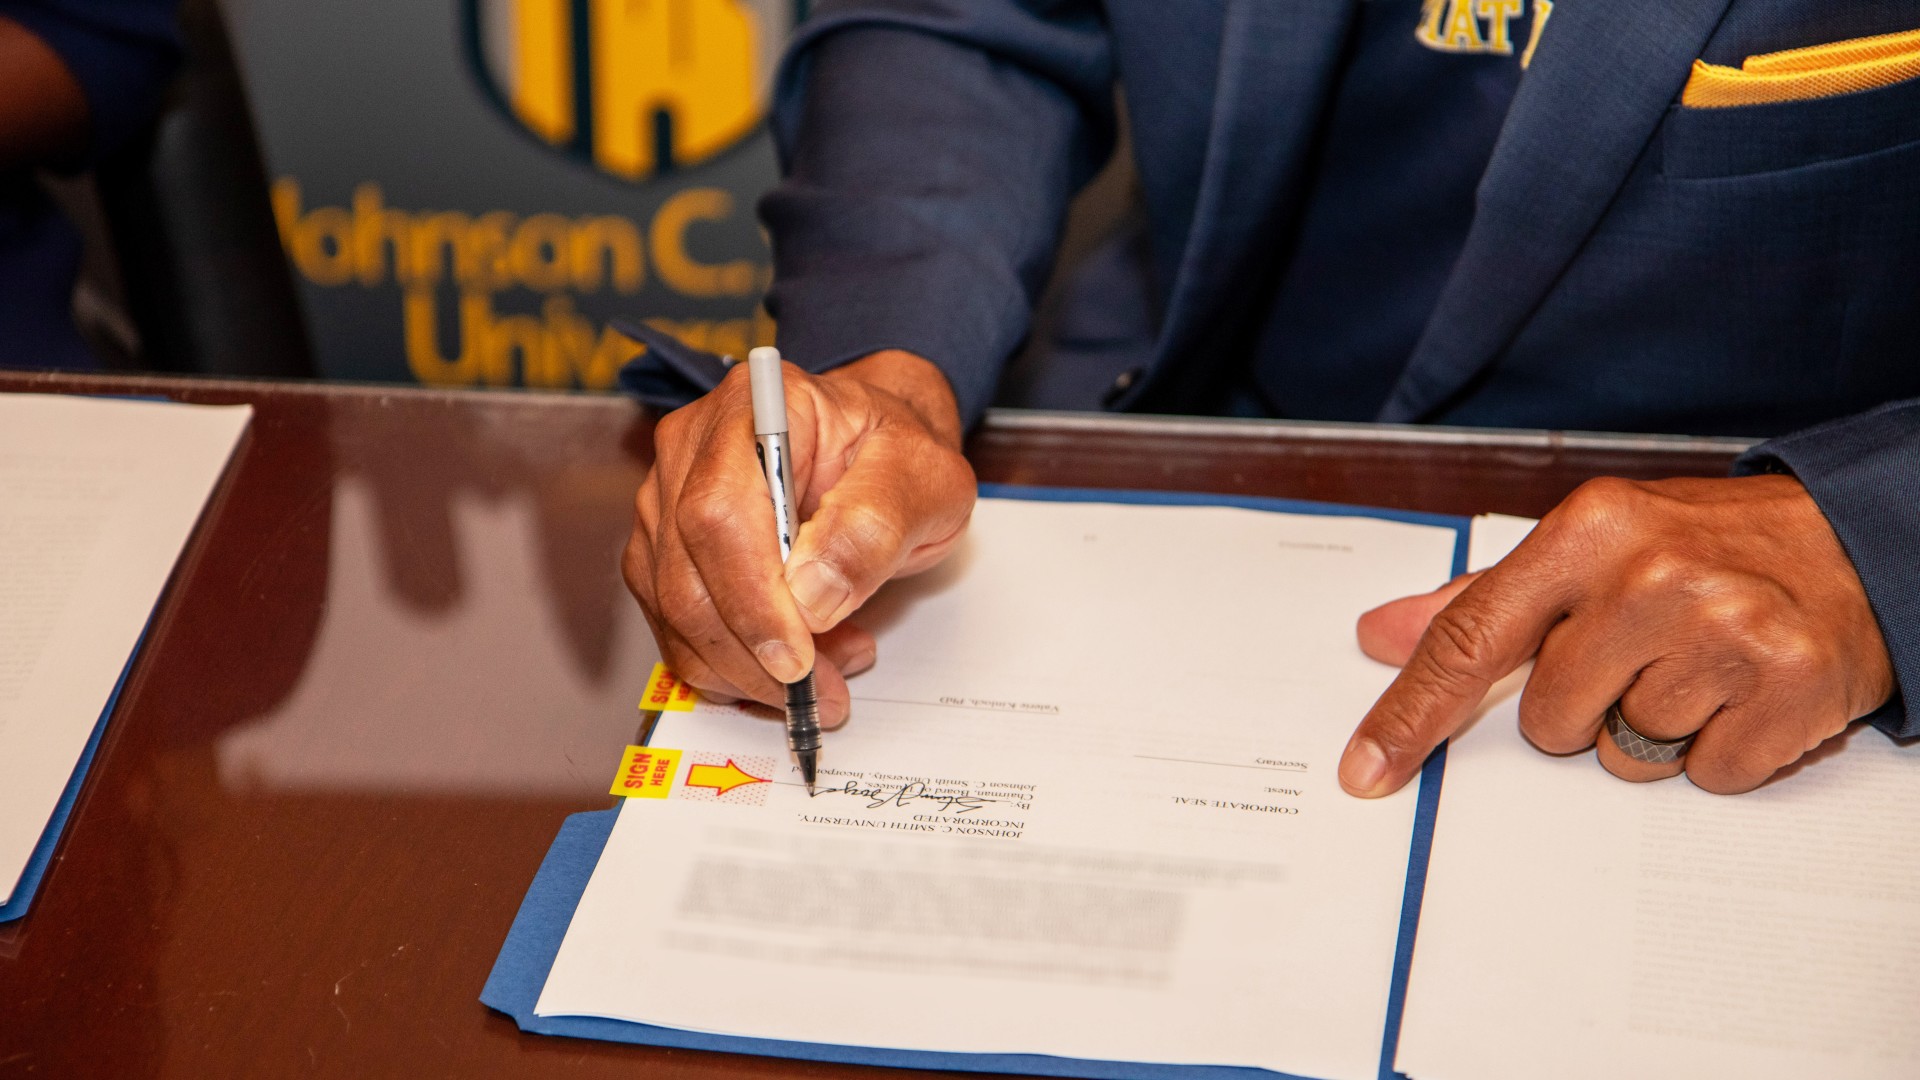 Steven L. Boyd signing the contracts